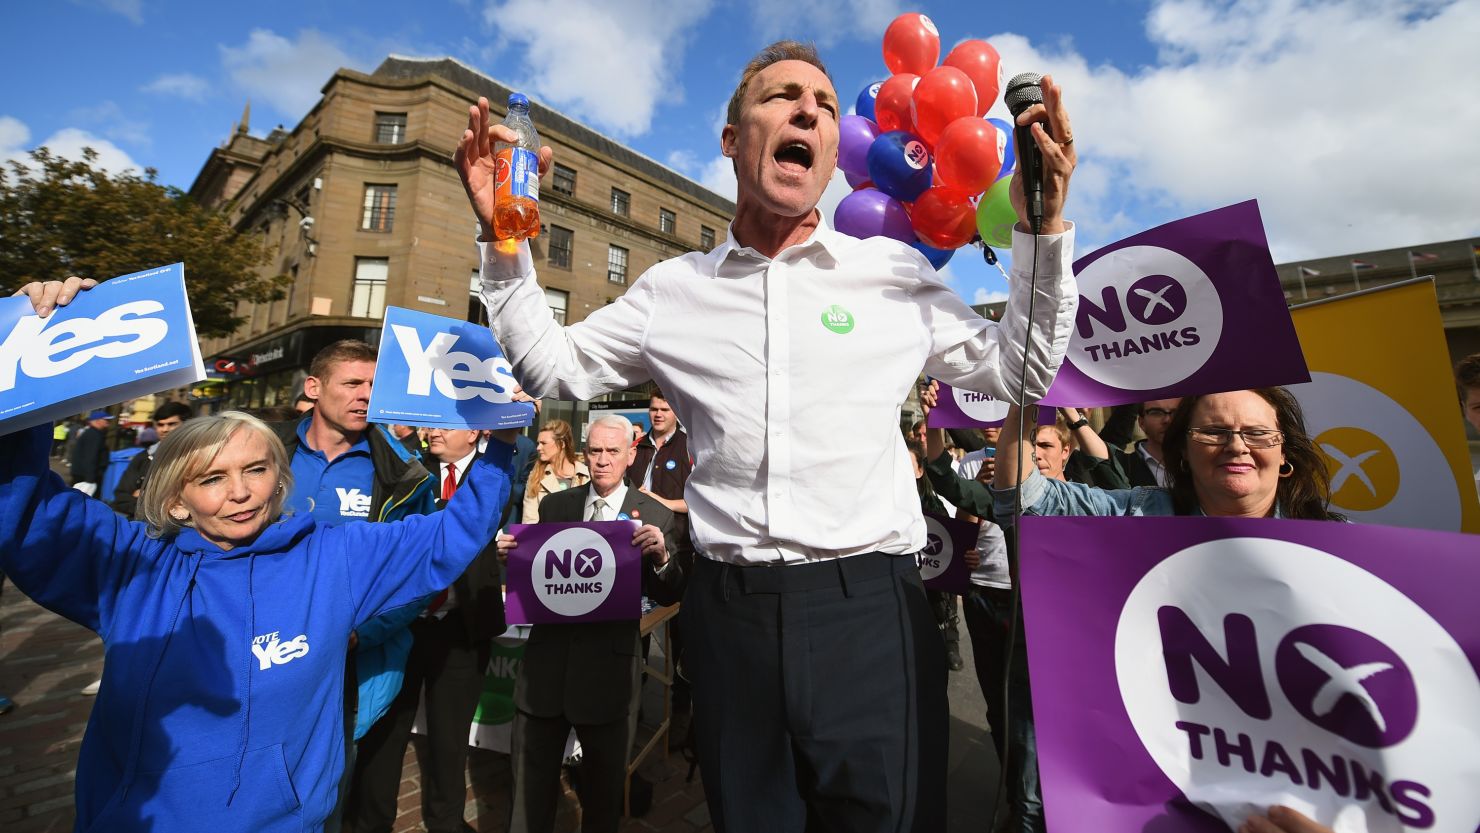 MP Jim Murphy temporarily suspended his campaign tour after he was pelted with eggs at one anti-independence rally